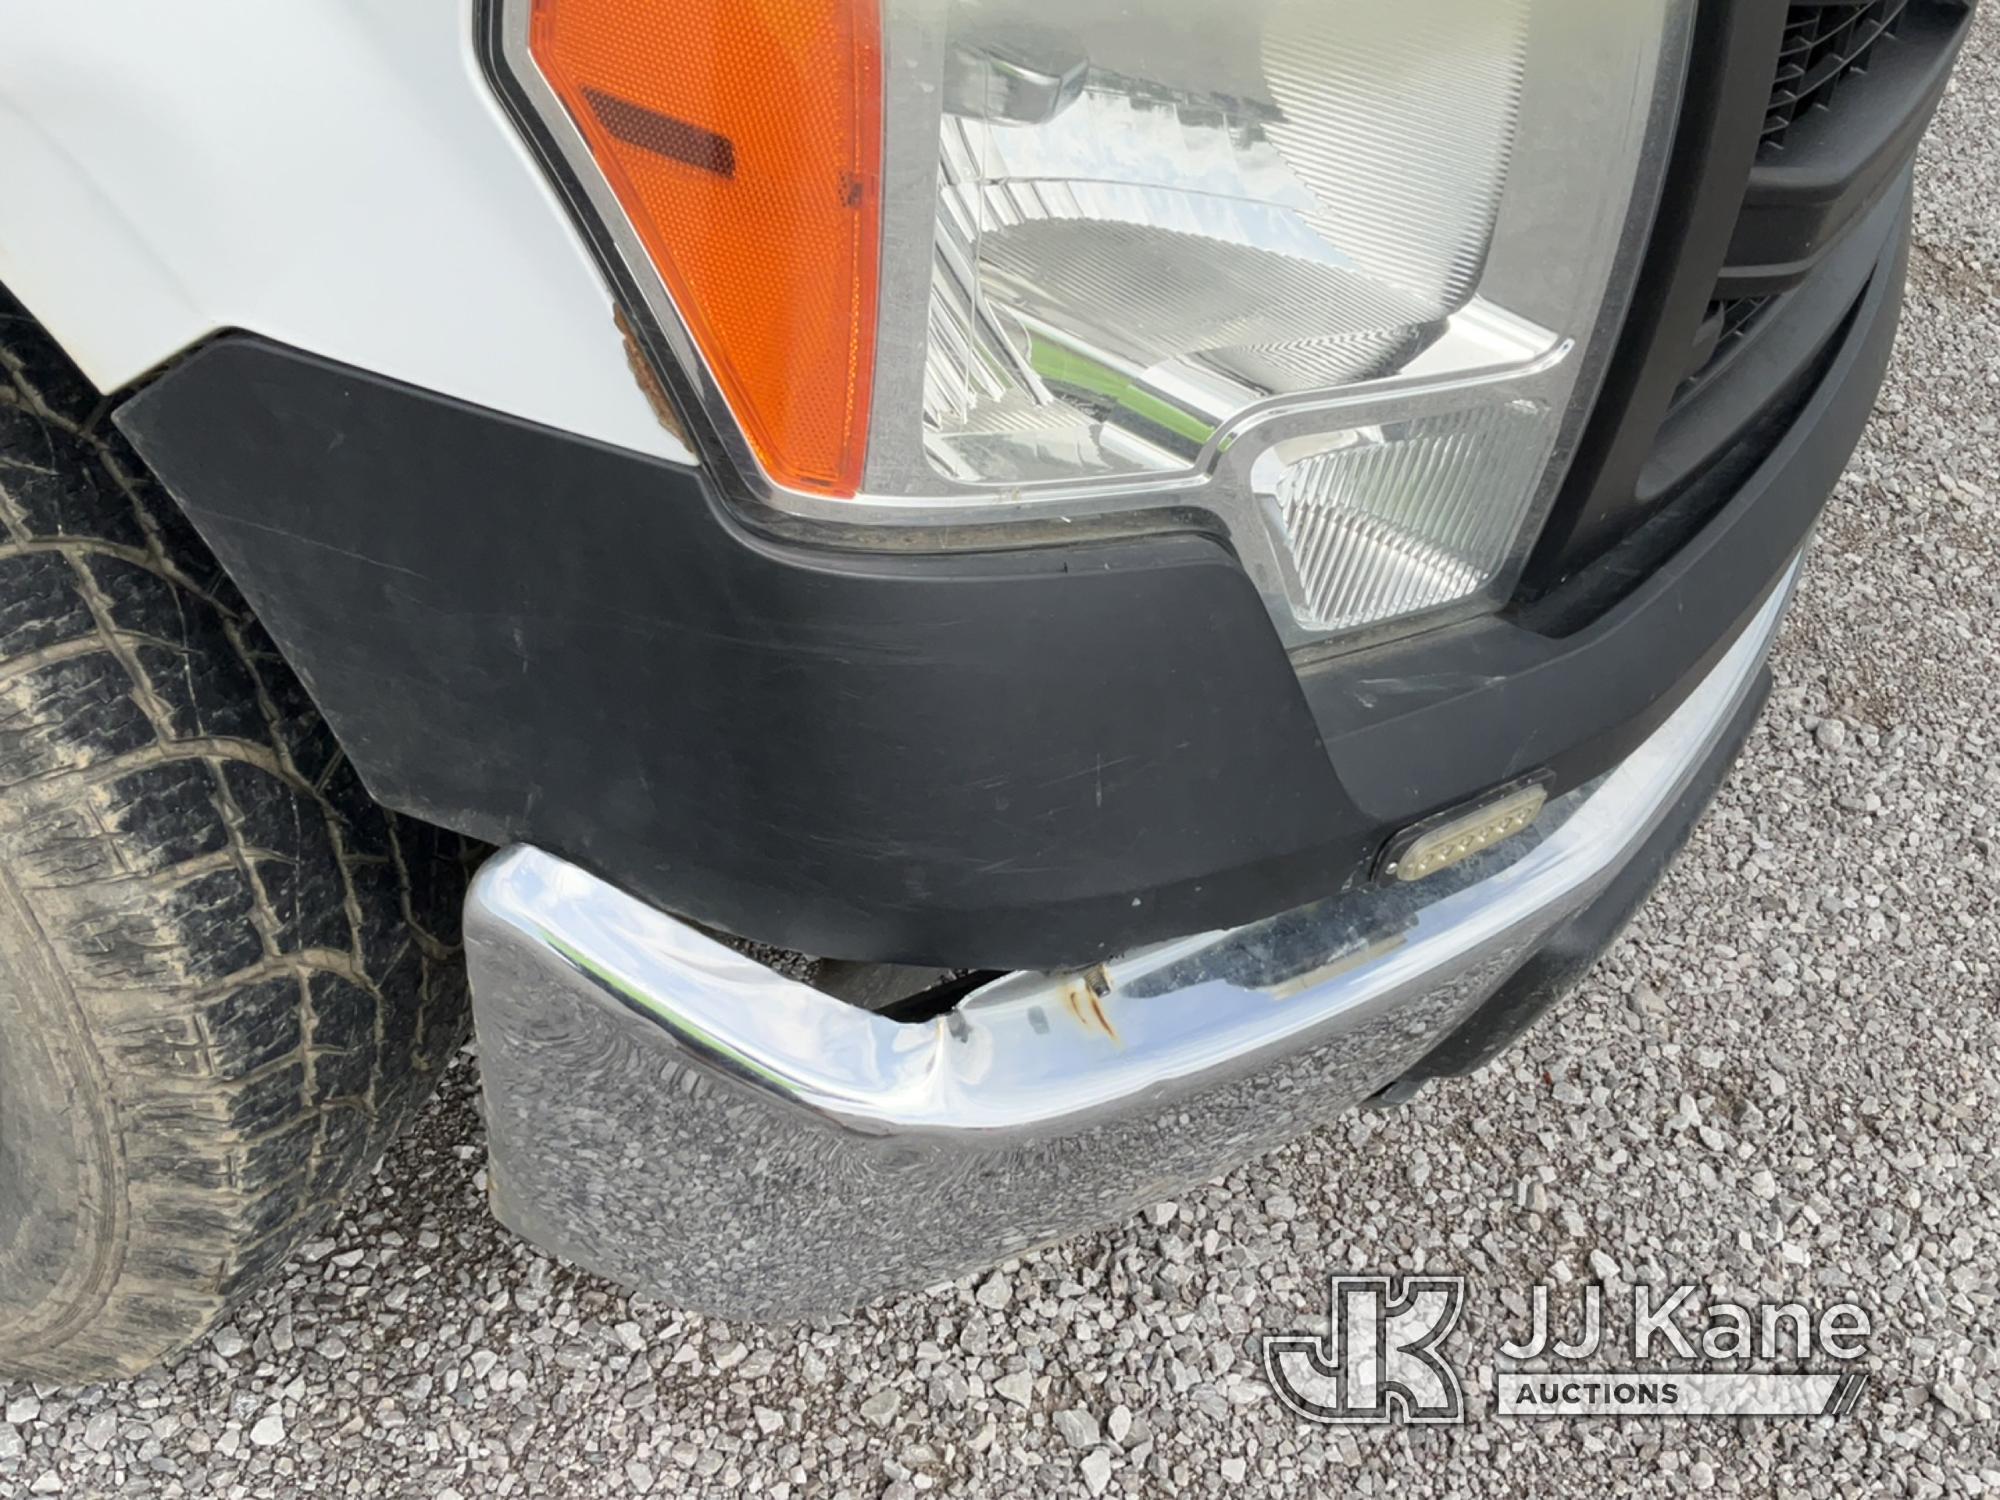 (Verona, KY) 2014 Ford F150 4x4 Extended-Cab Pickup Truck Runs & Moves) (Check Engine Light On, Body